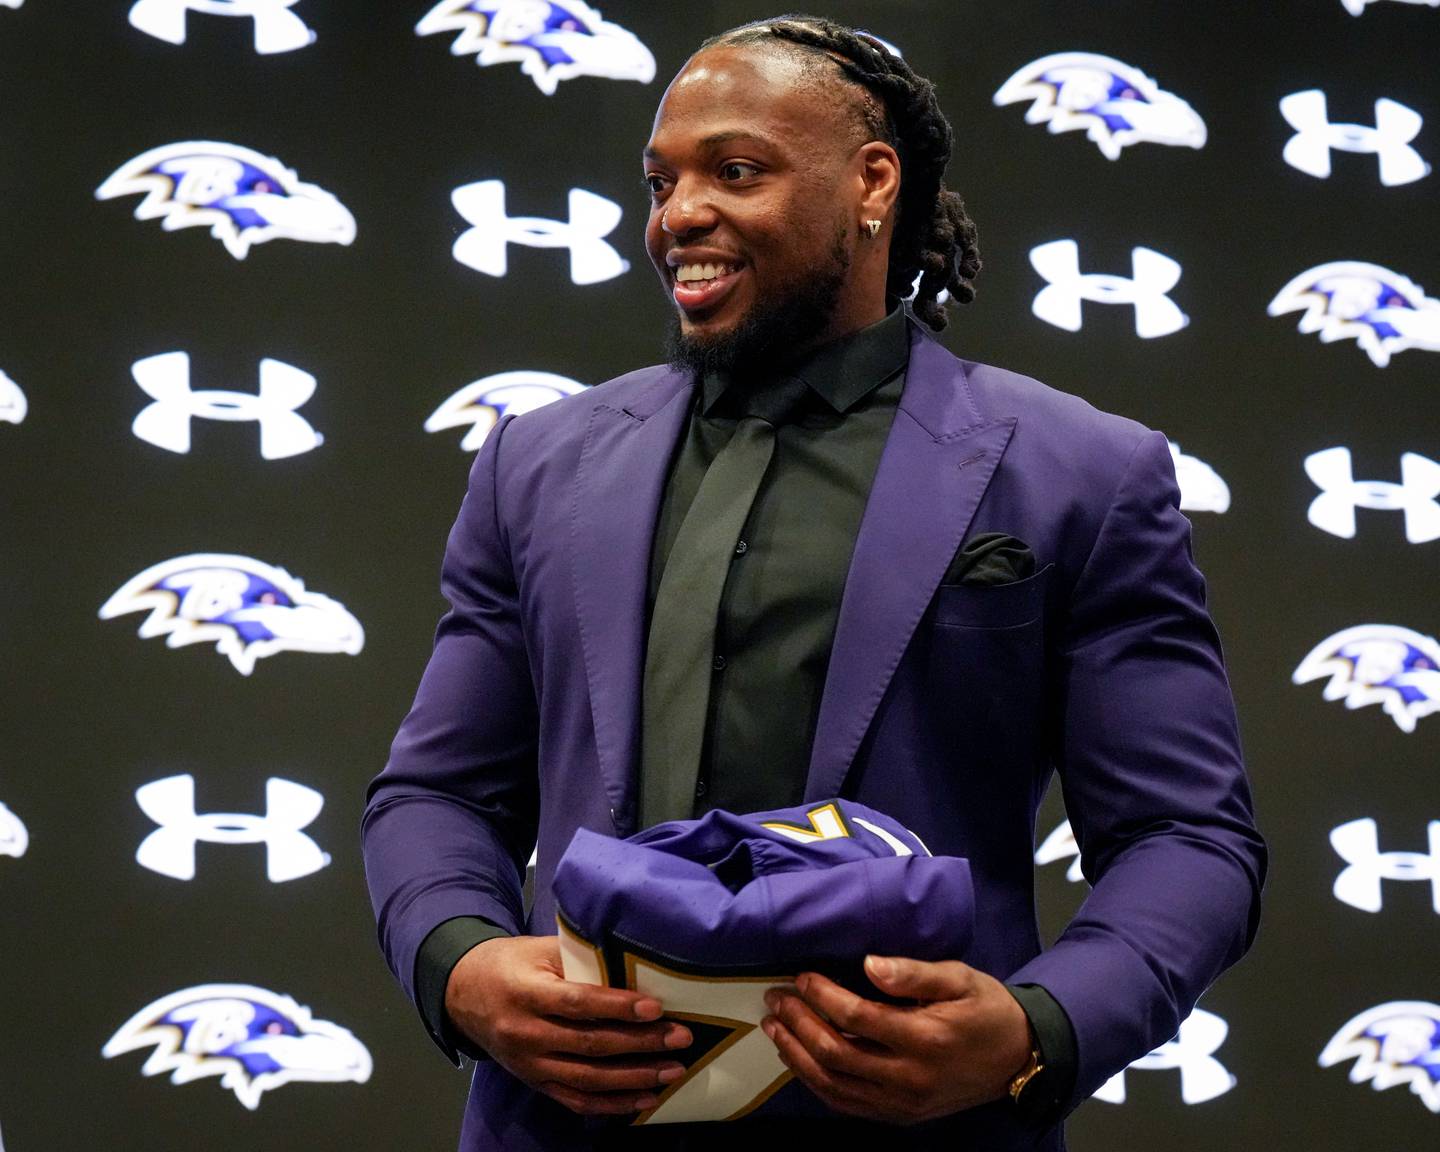 Newly signed Baltimore Ravens running back Derrick Henry holds his team jersey following a news conference at the Under Armour Performance Center in Owings Mills on Thursday, March 14.